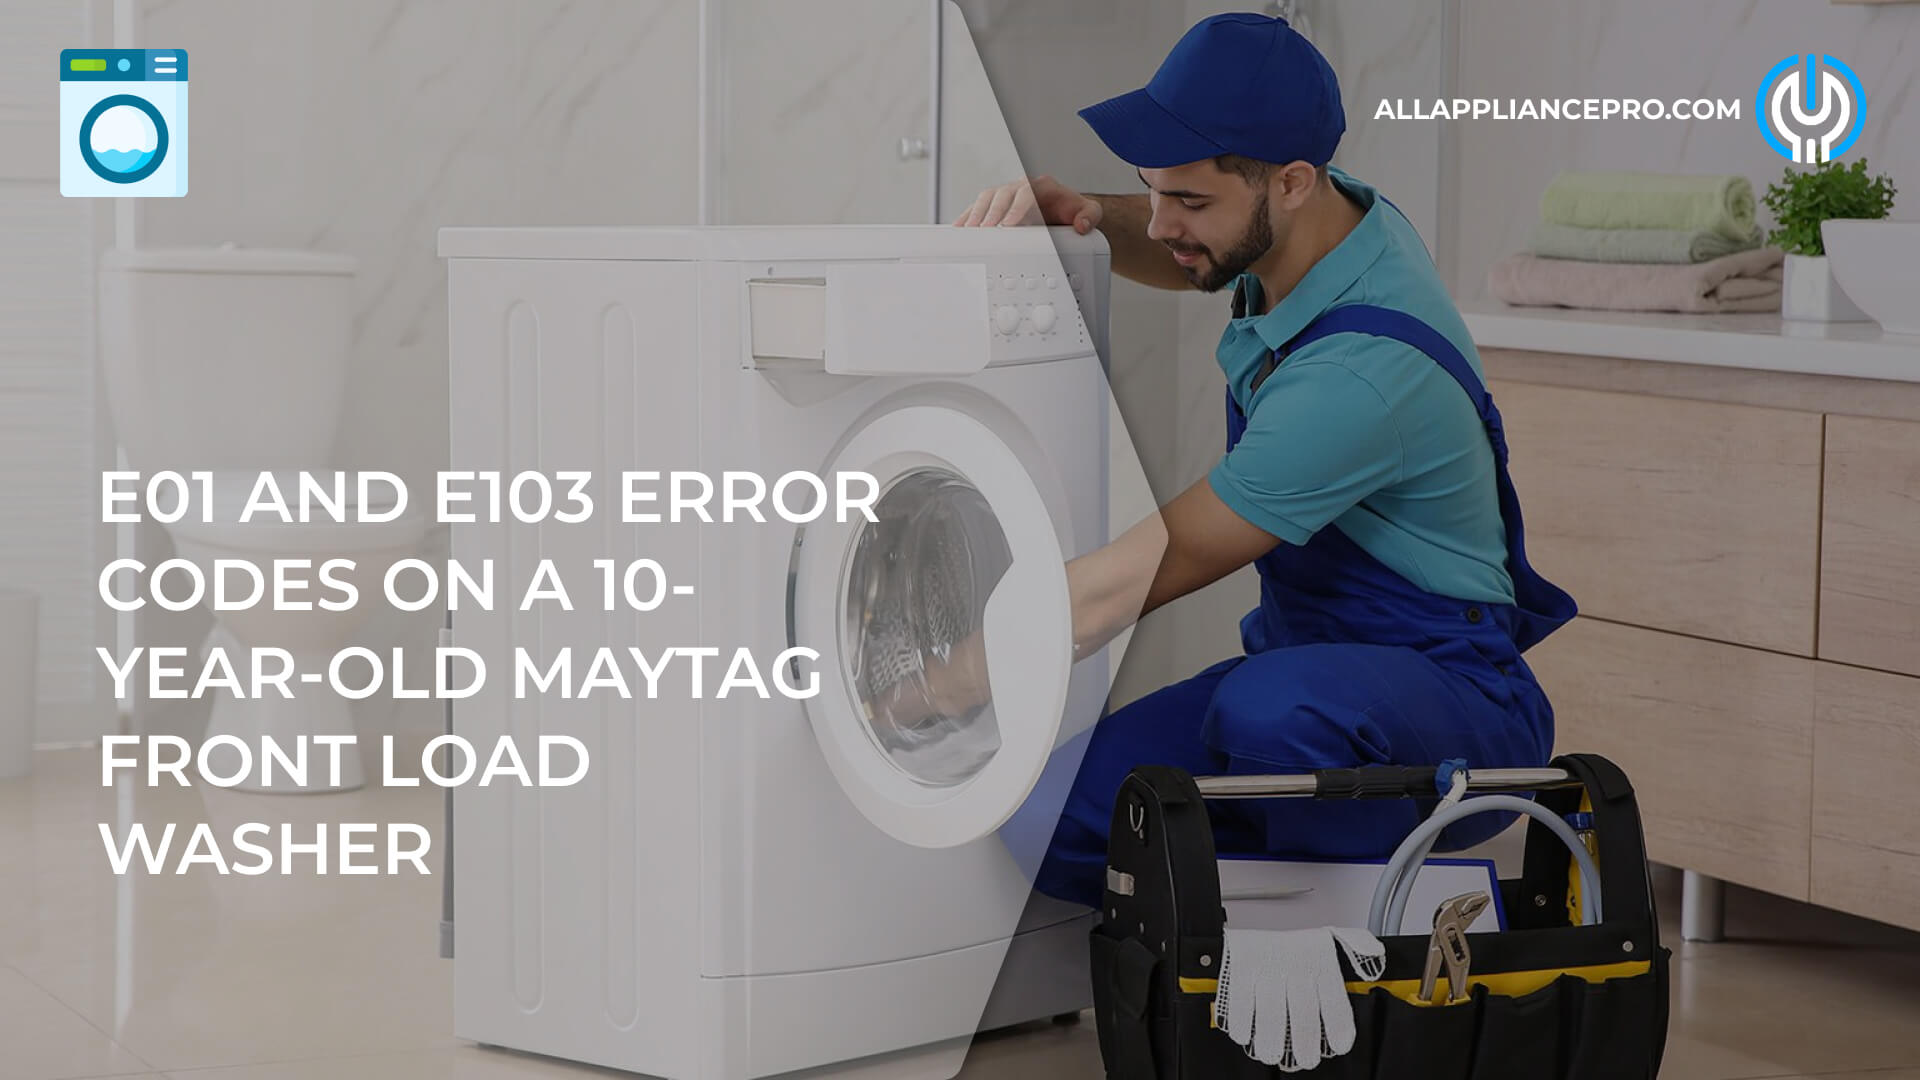 E01 and E103 Error Codes on a 10-Year-Old Maytag Front Load Washer